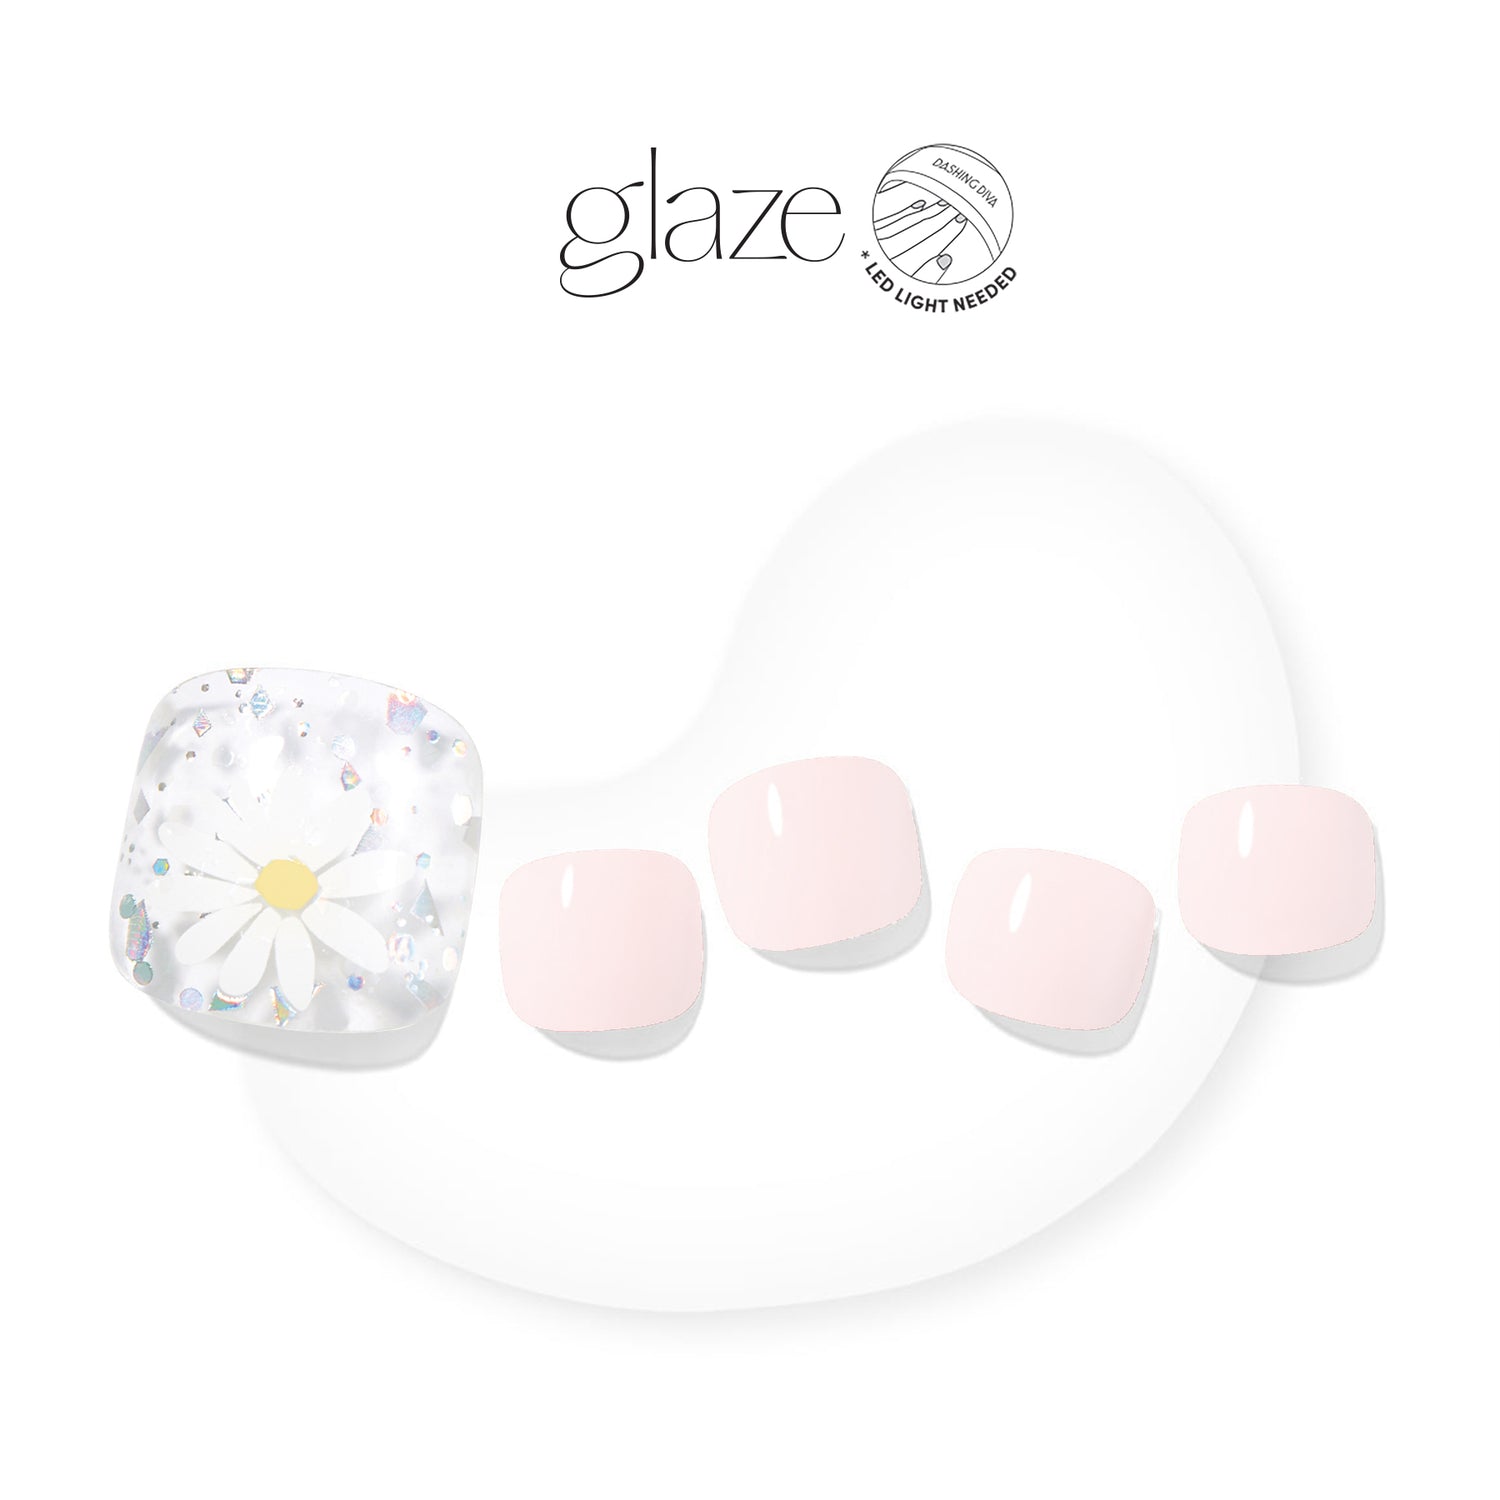 Dashing Diva GLAZE baby pink semi-cured gel pedicure strips with daisies & iridescent mosaic accents